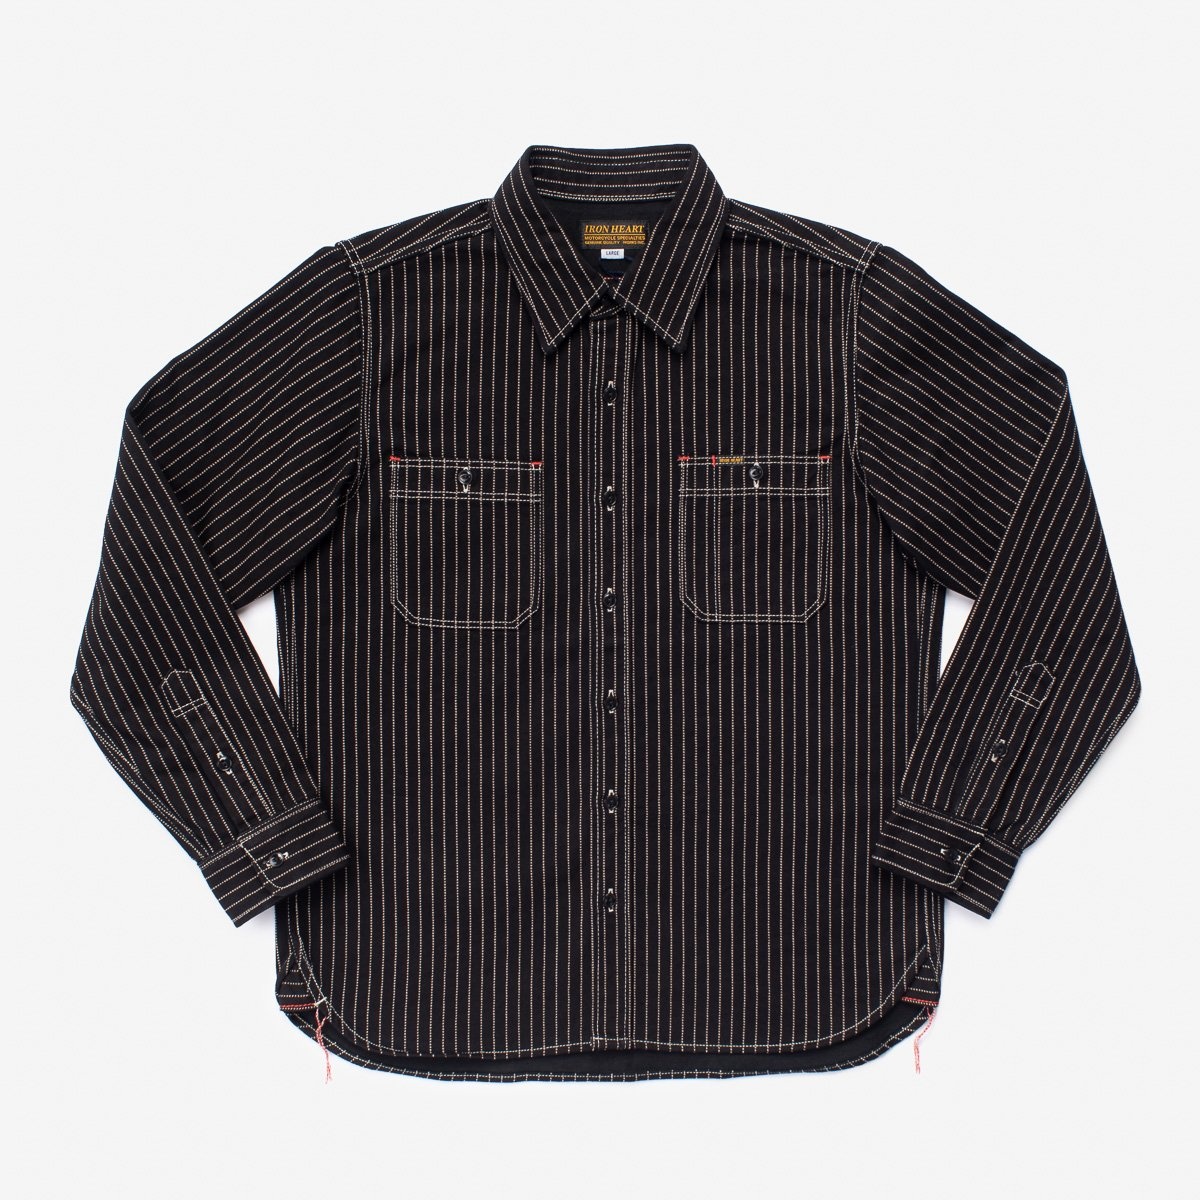 IHSH-266-BLK 12oz Wabash Work Shirt - Black with Black Buttons - 1